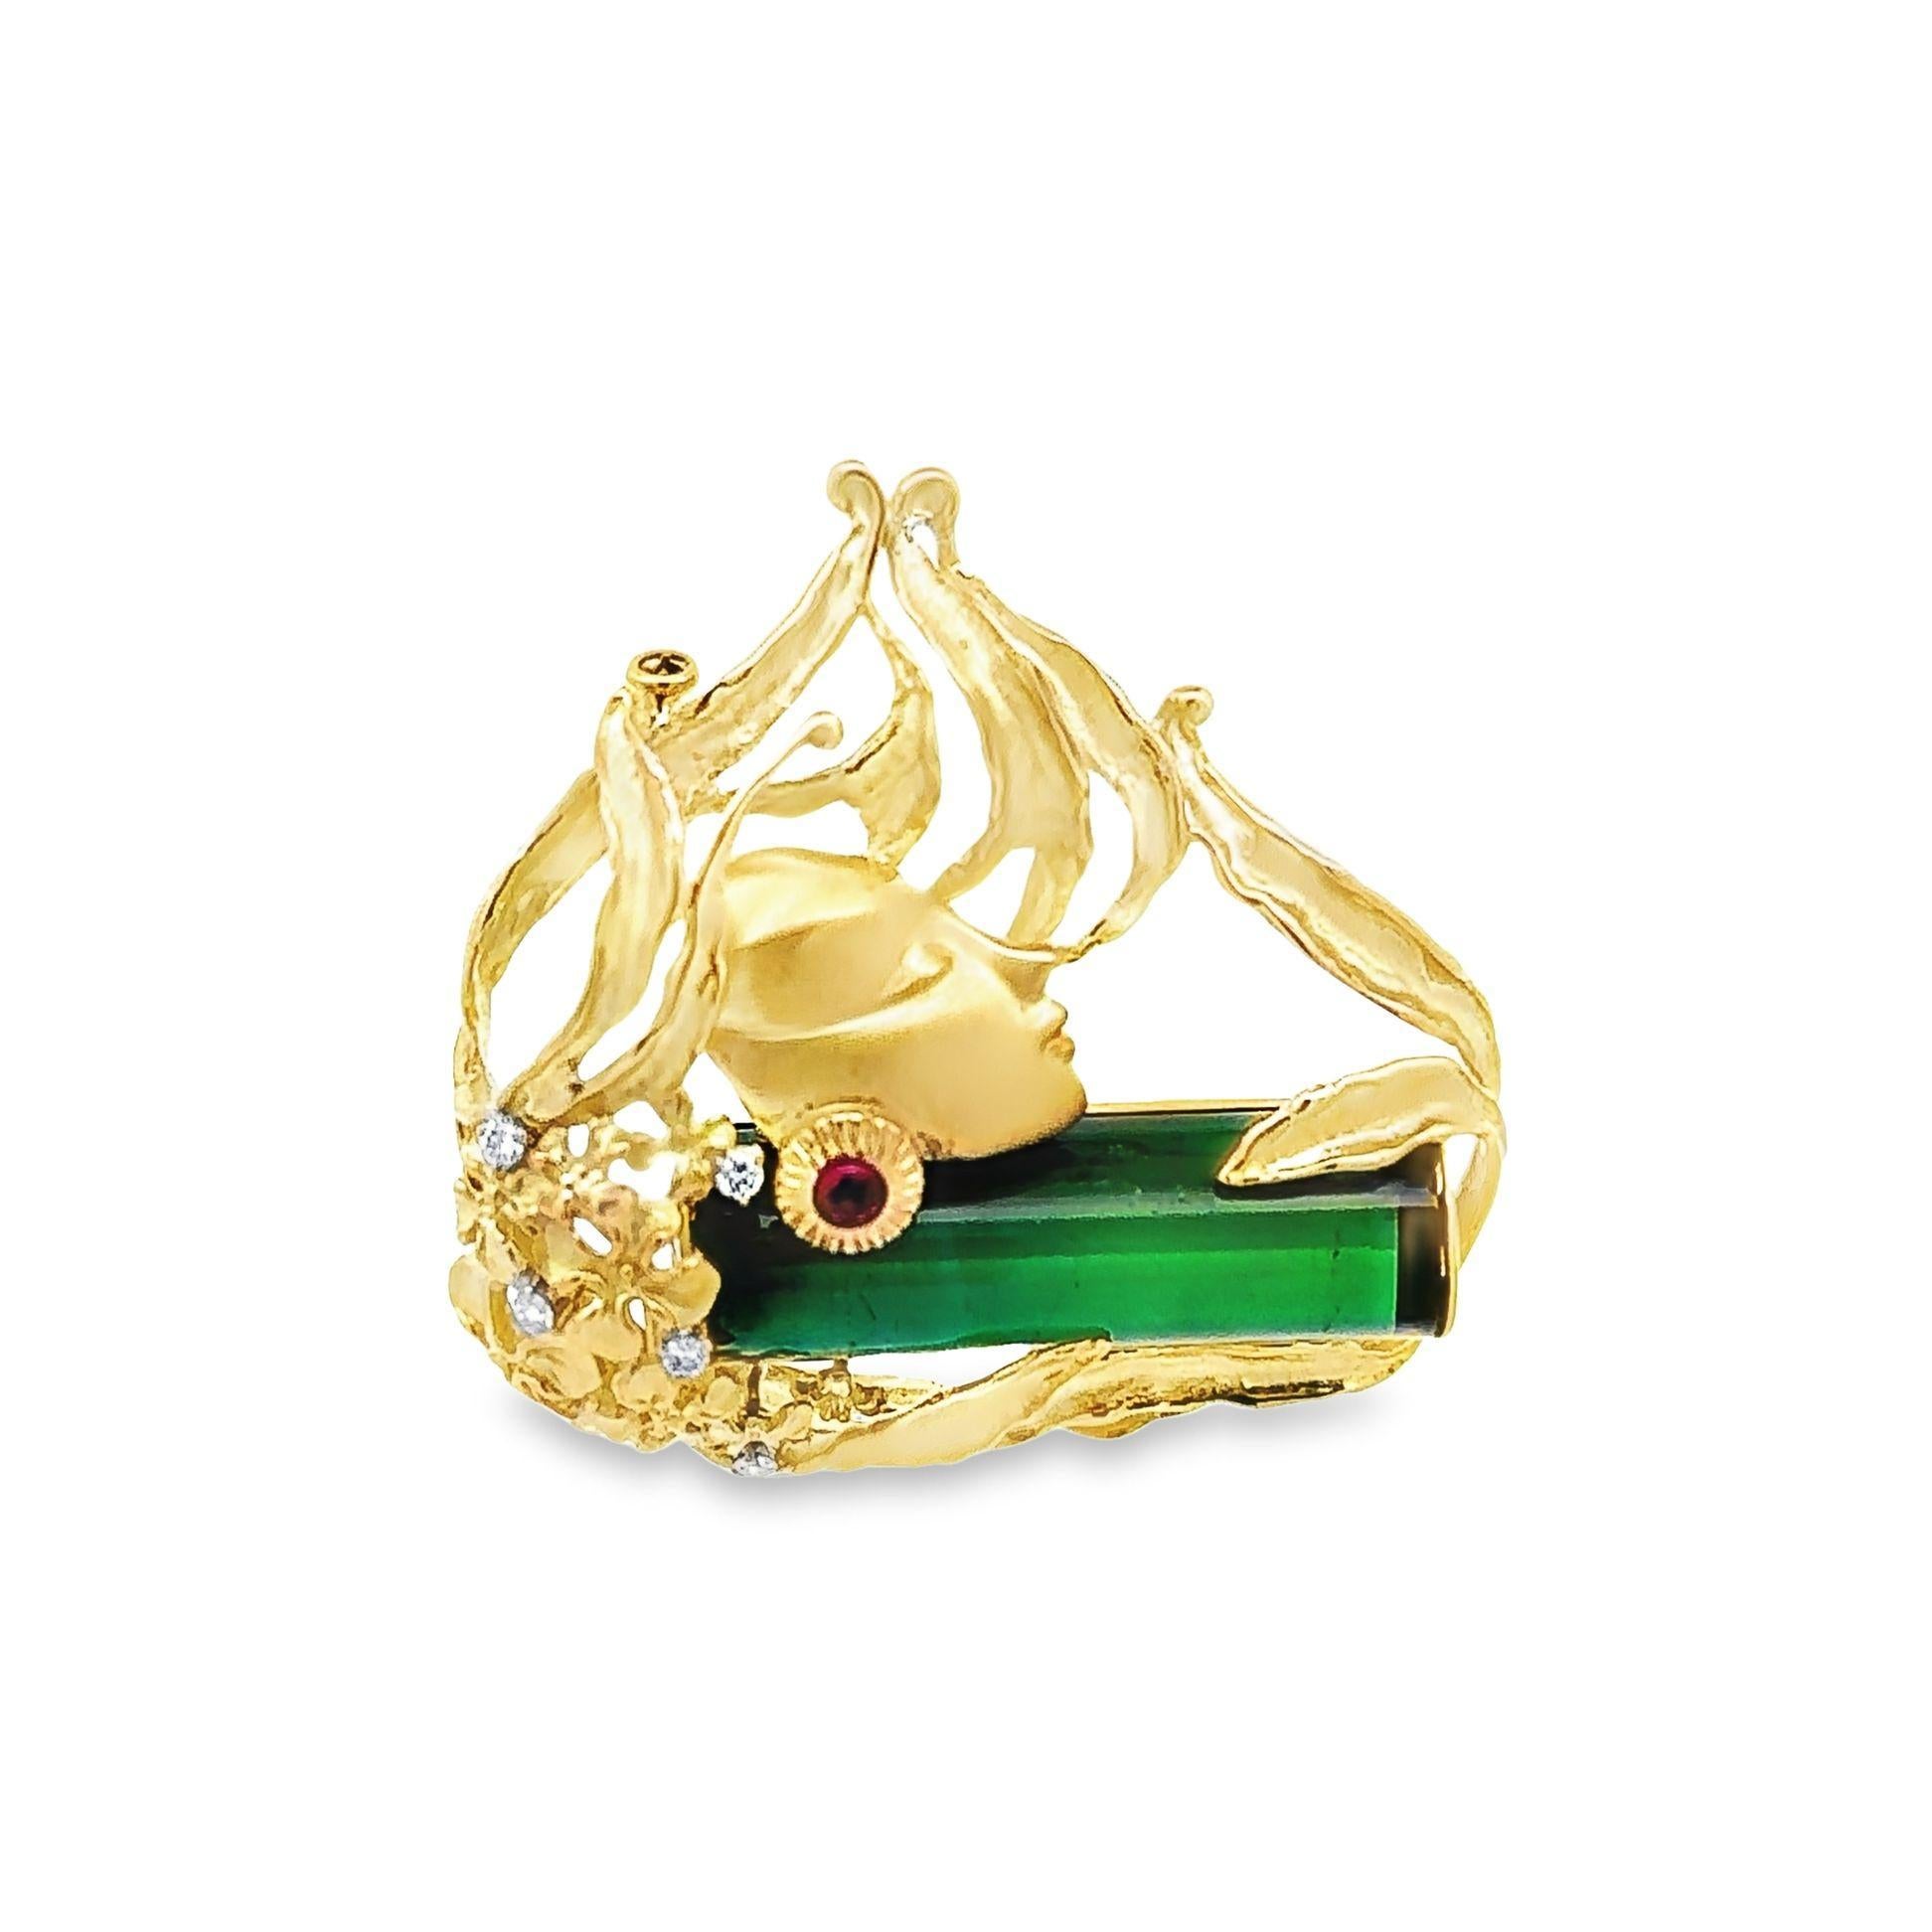 27.16 Carat Green Tourmaline 18k Yellow Gold Art Nouveau Inspired Brooch In New Condition For Sale In Beverly Hills, CA